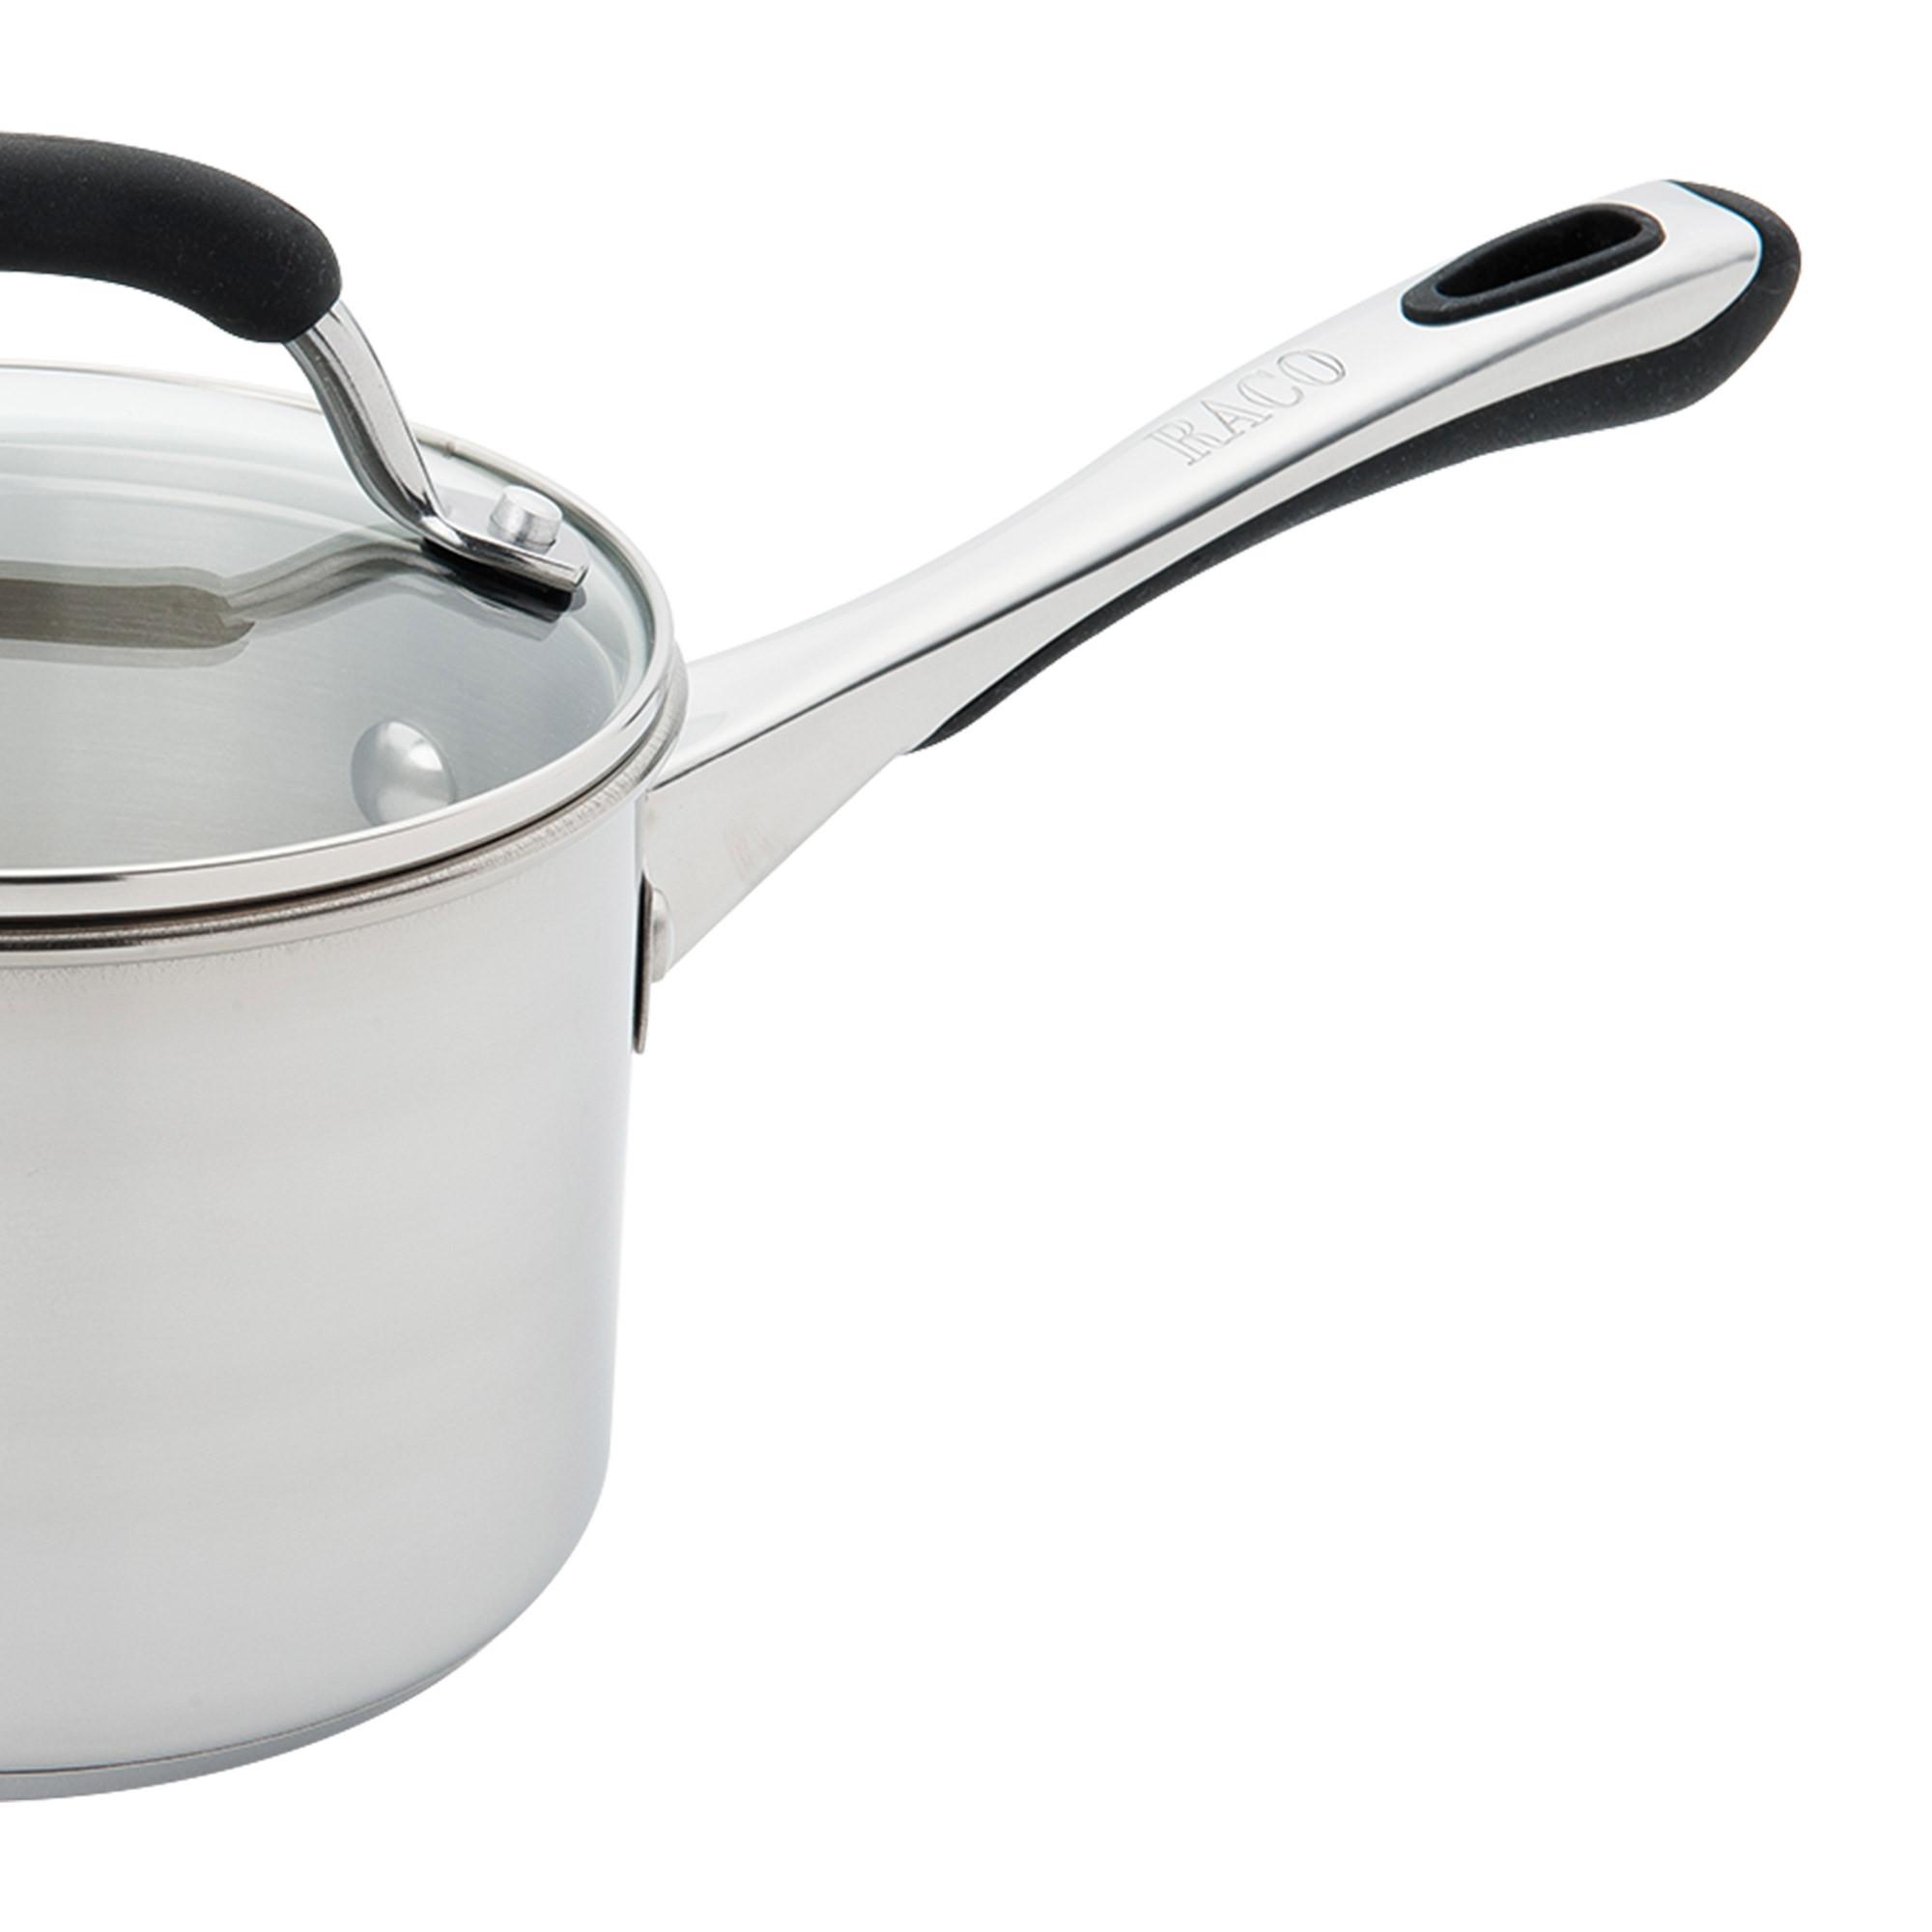 Raco Contemporary Stainless Steel Saucepan 14cm - 1.4L Image 5